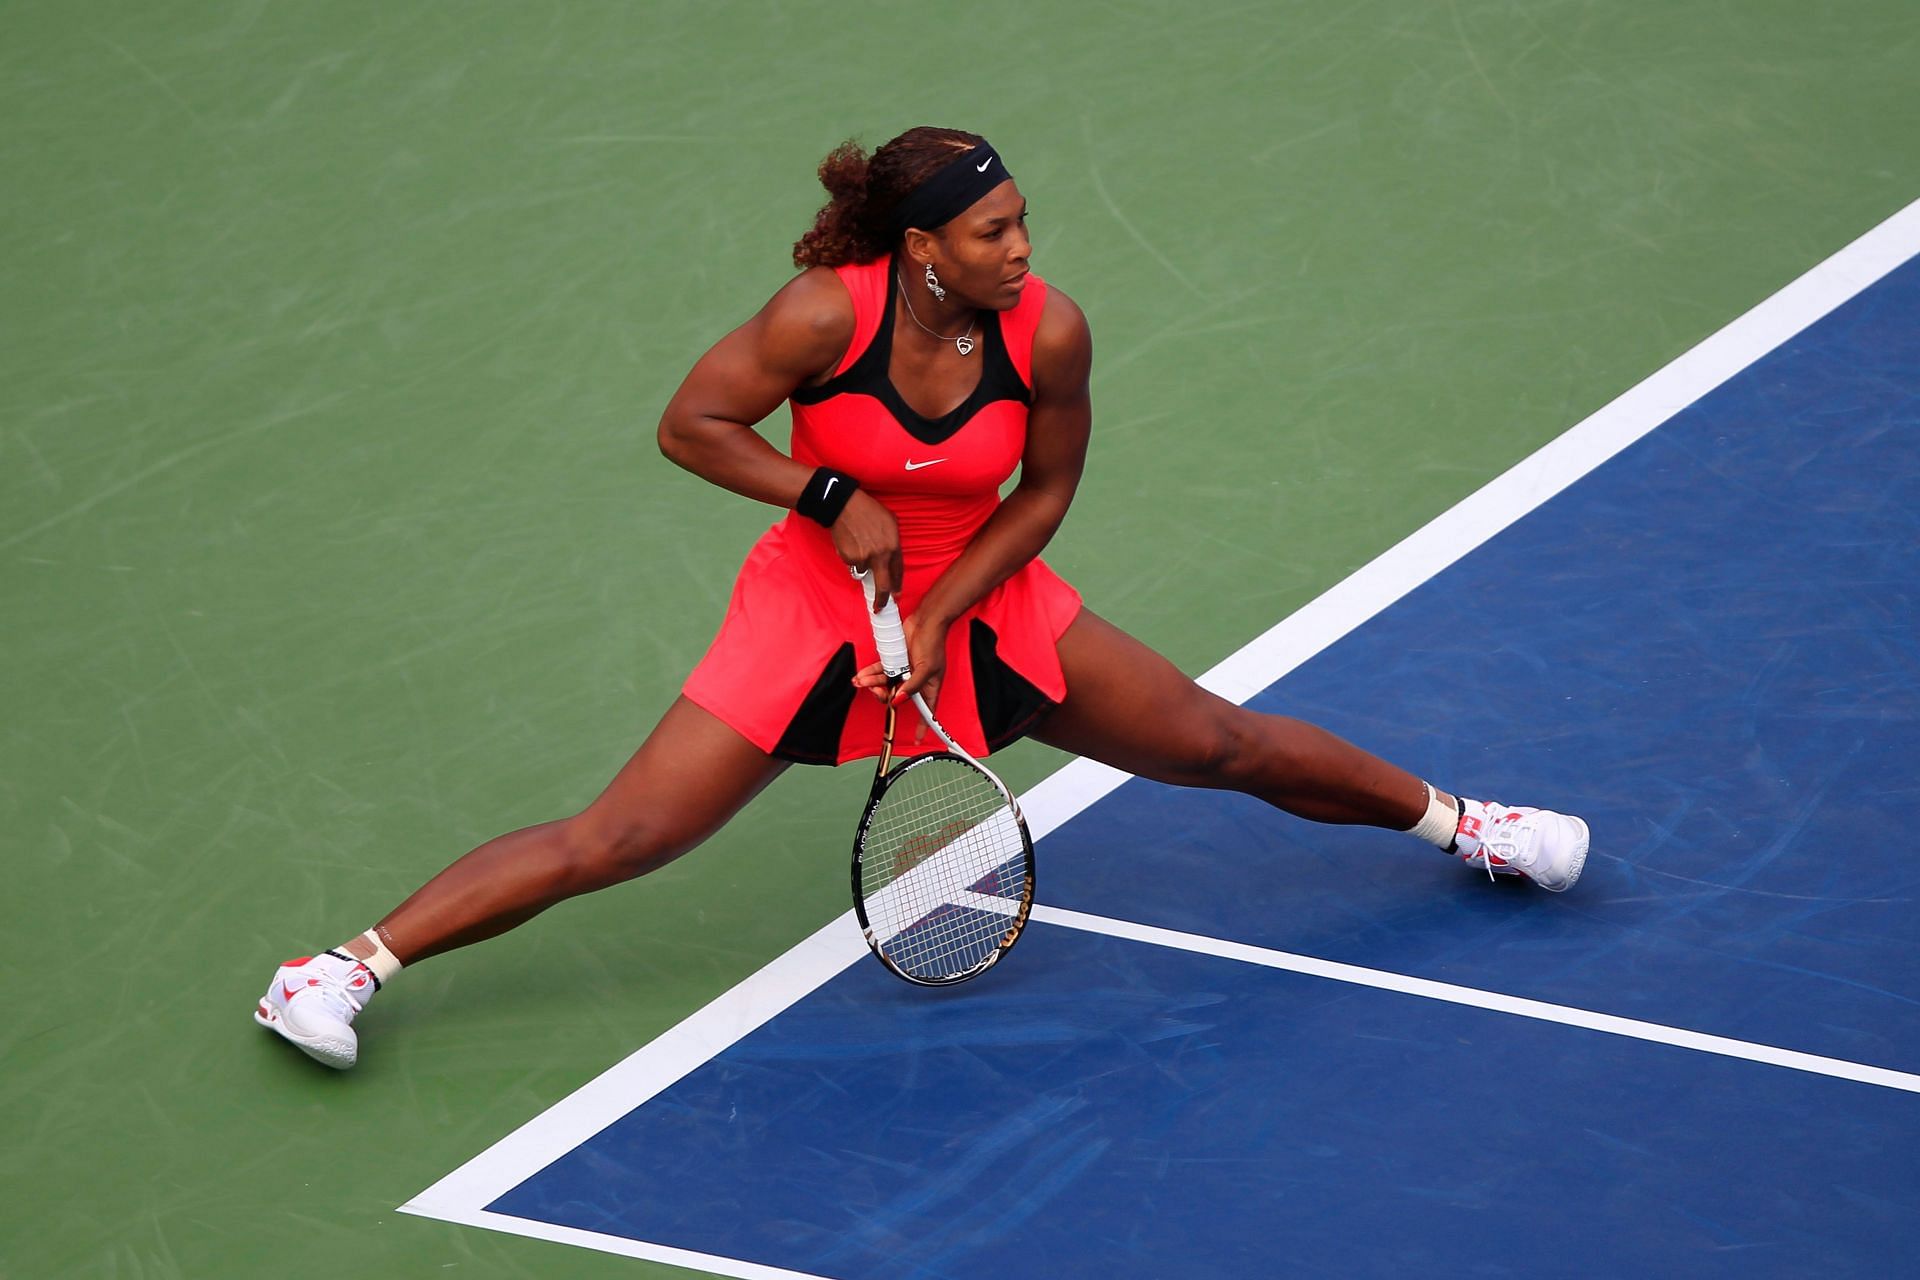 Serena Williams at the 2011 US Open